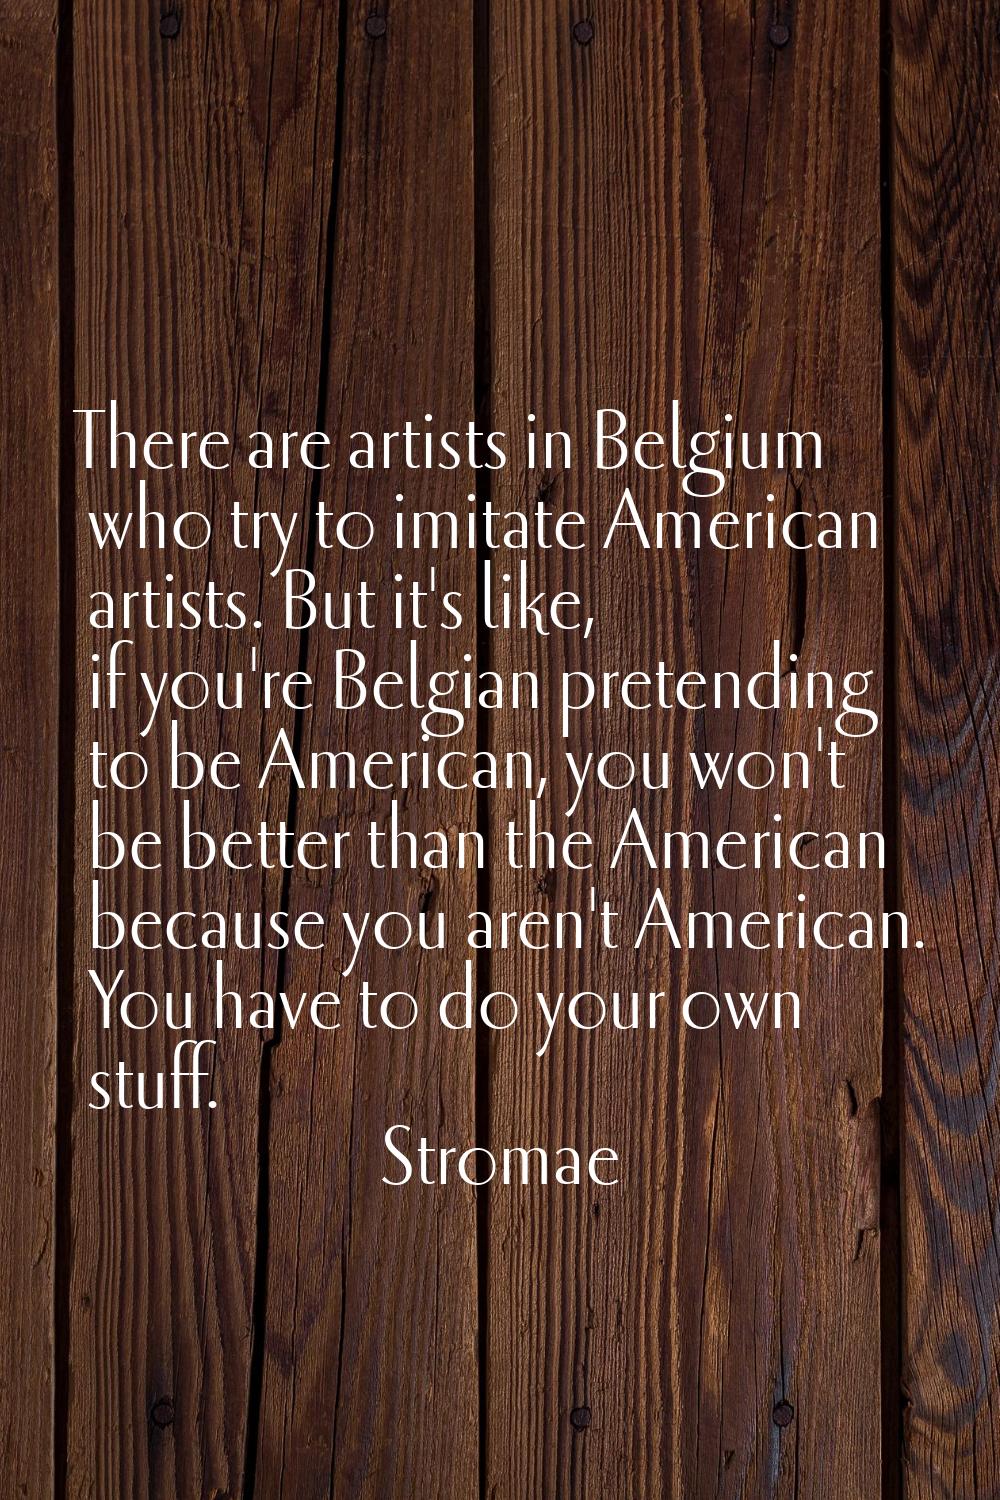 There are artists in Belgium who try to imitate American artists. But it's like, if you're Belgian 